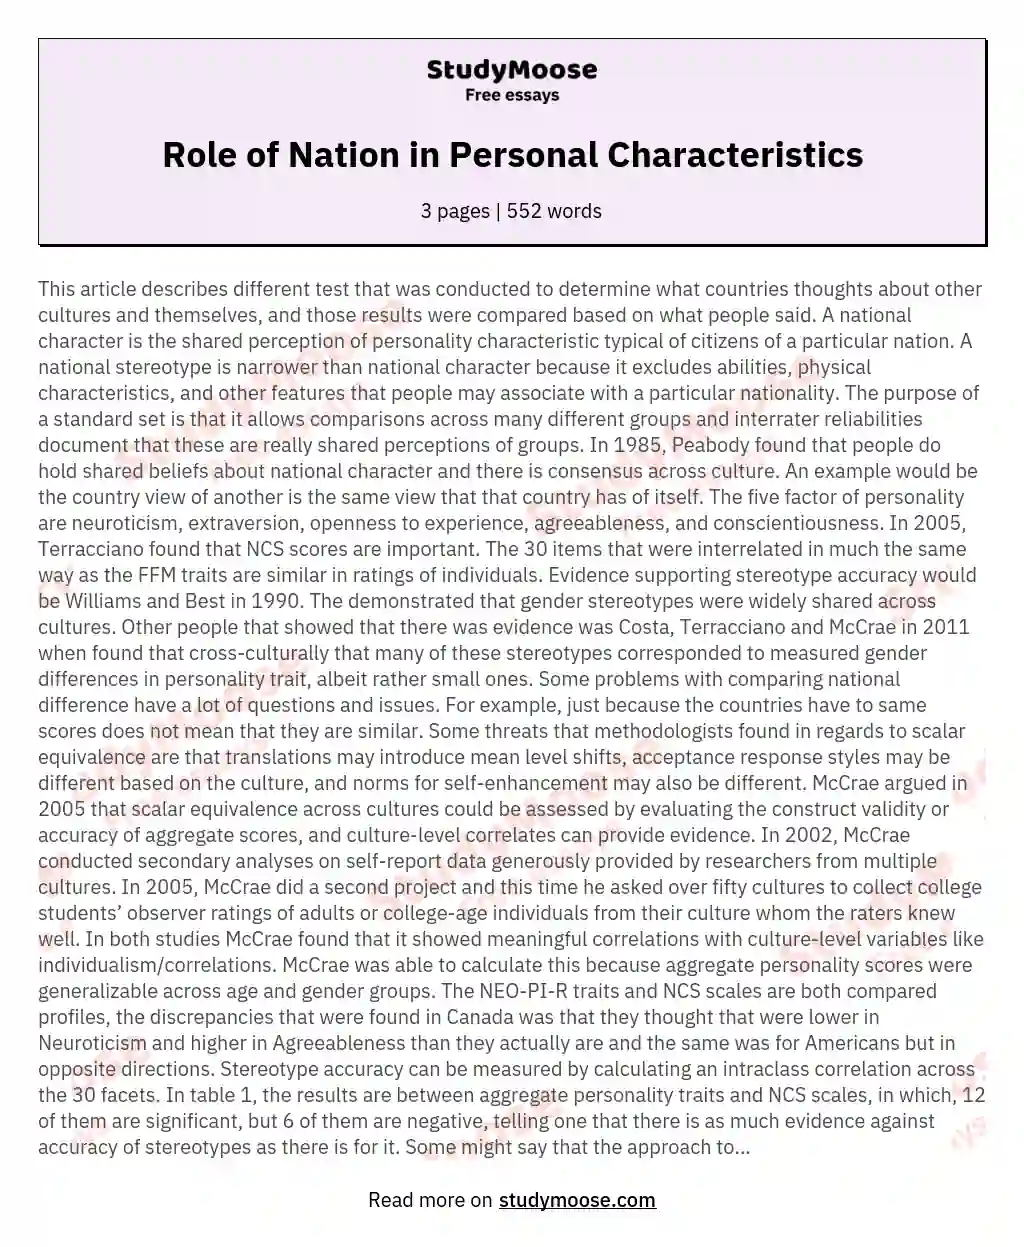 Role of Nation in Personal Characteristics essay